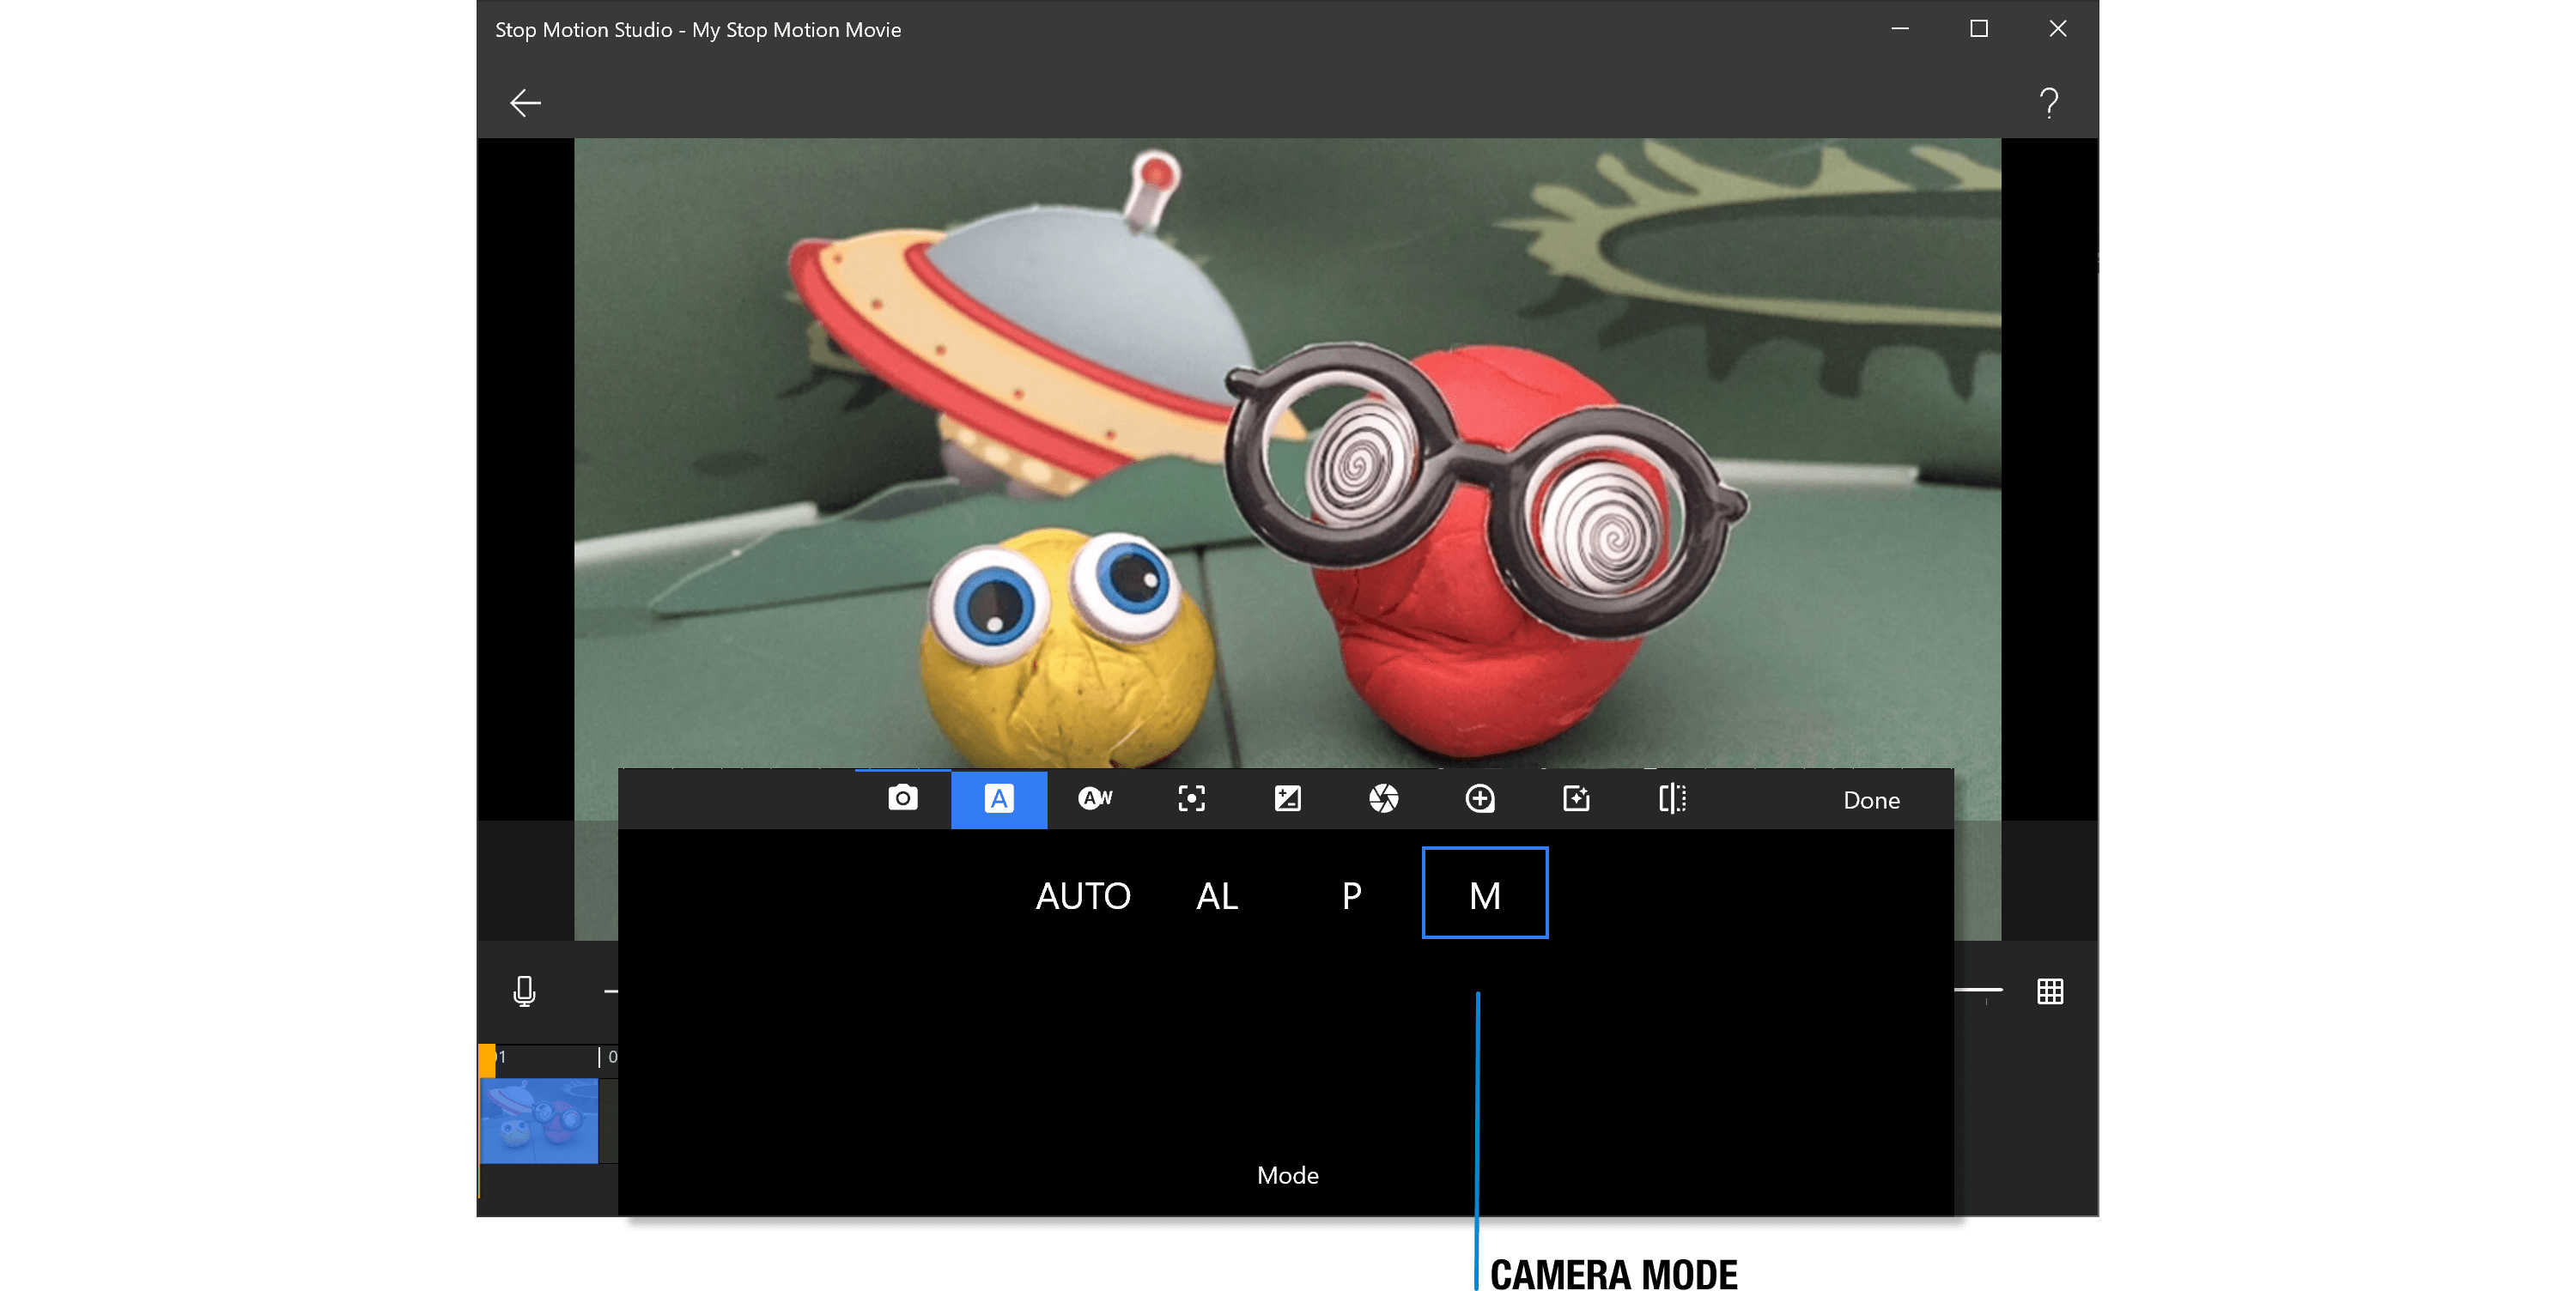 Stop Motion Studio for Windows - Choose the best Camera Mode